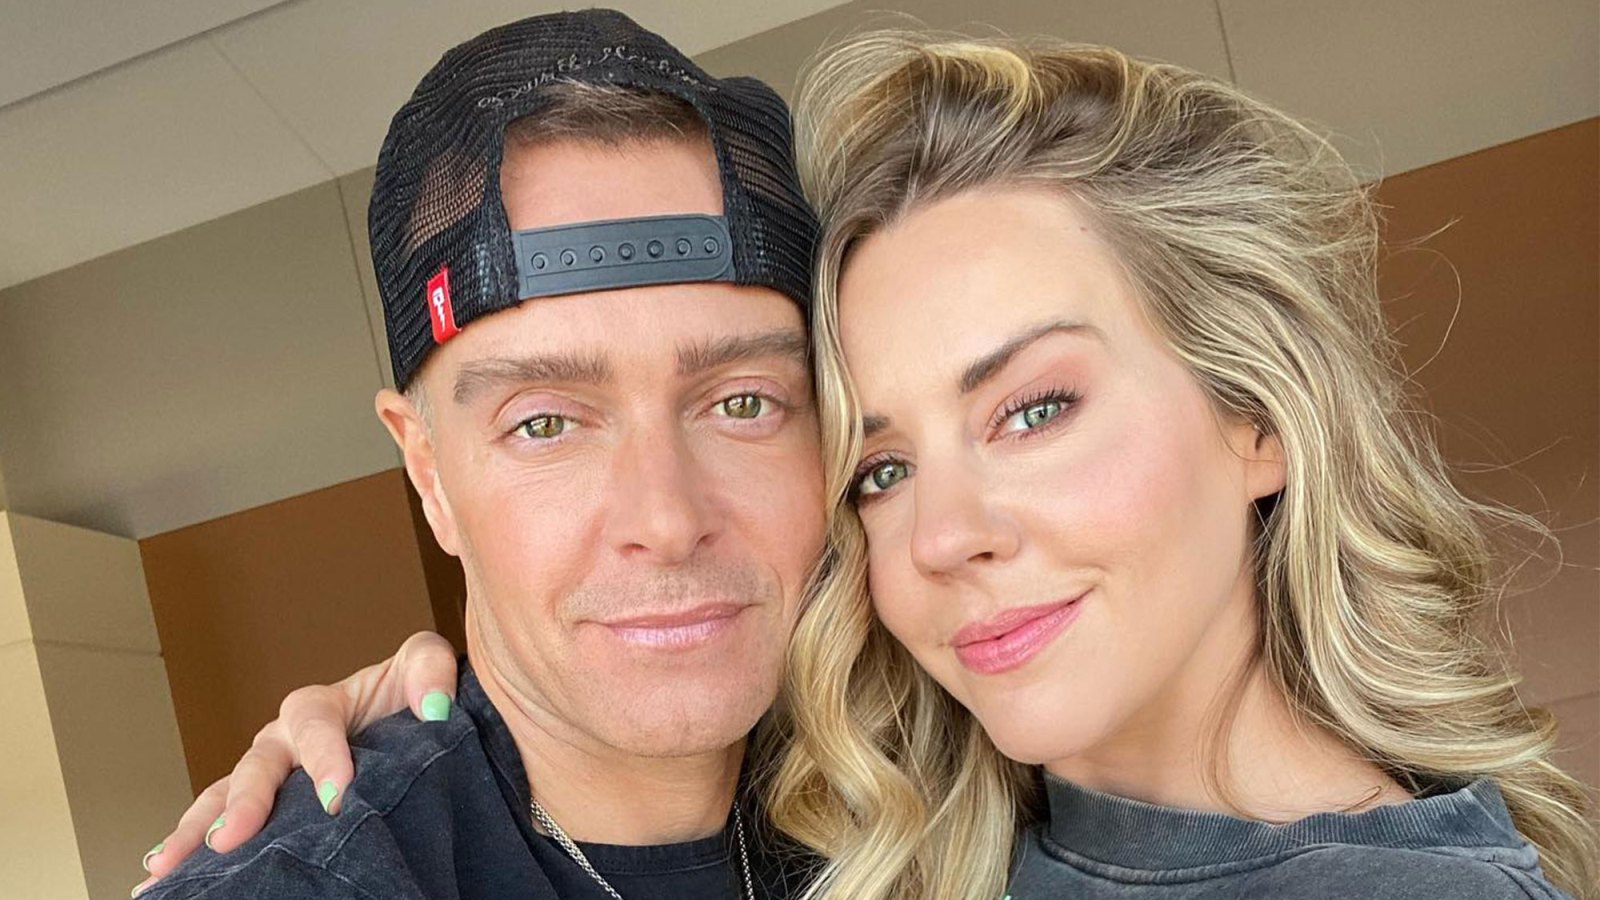 Joey Lawrence and Wife Samantha Cope Expecting 1st Child Together, His 3rd